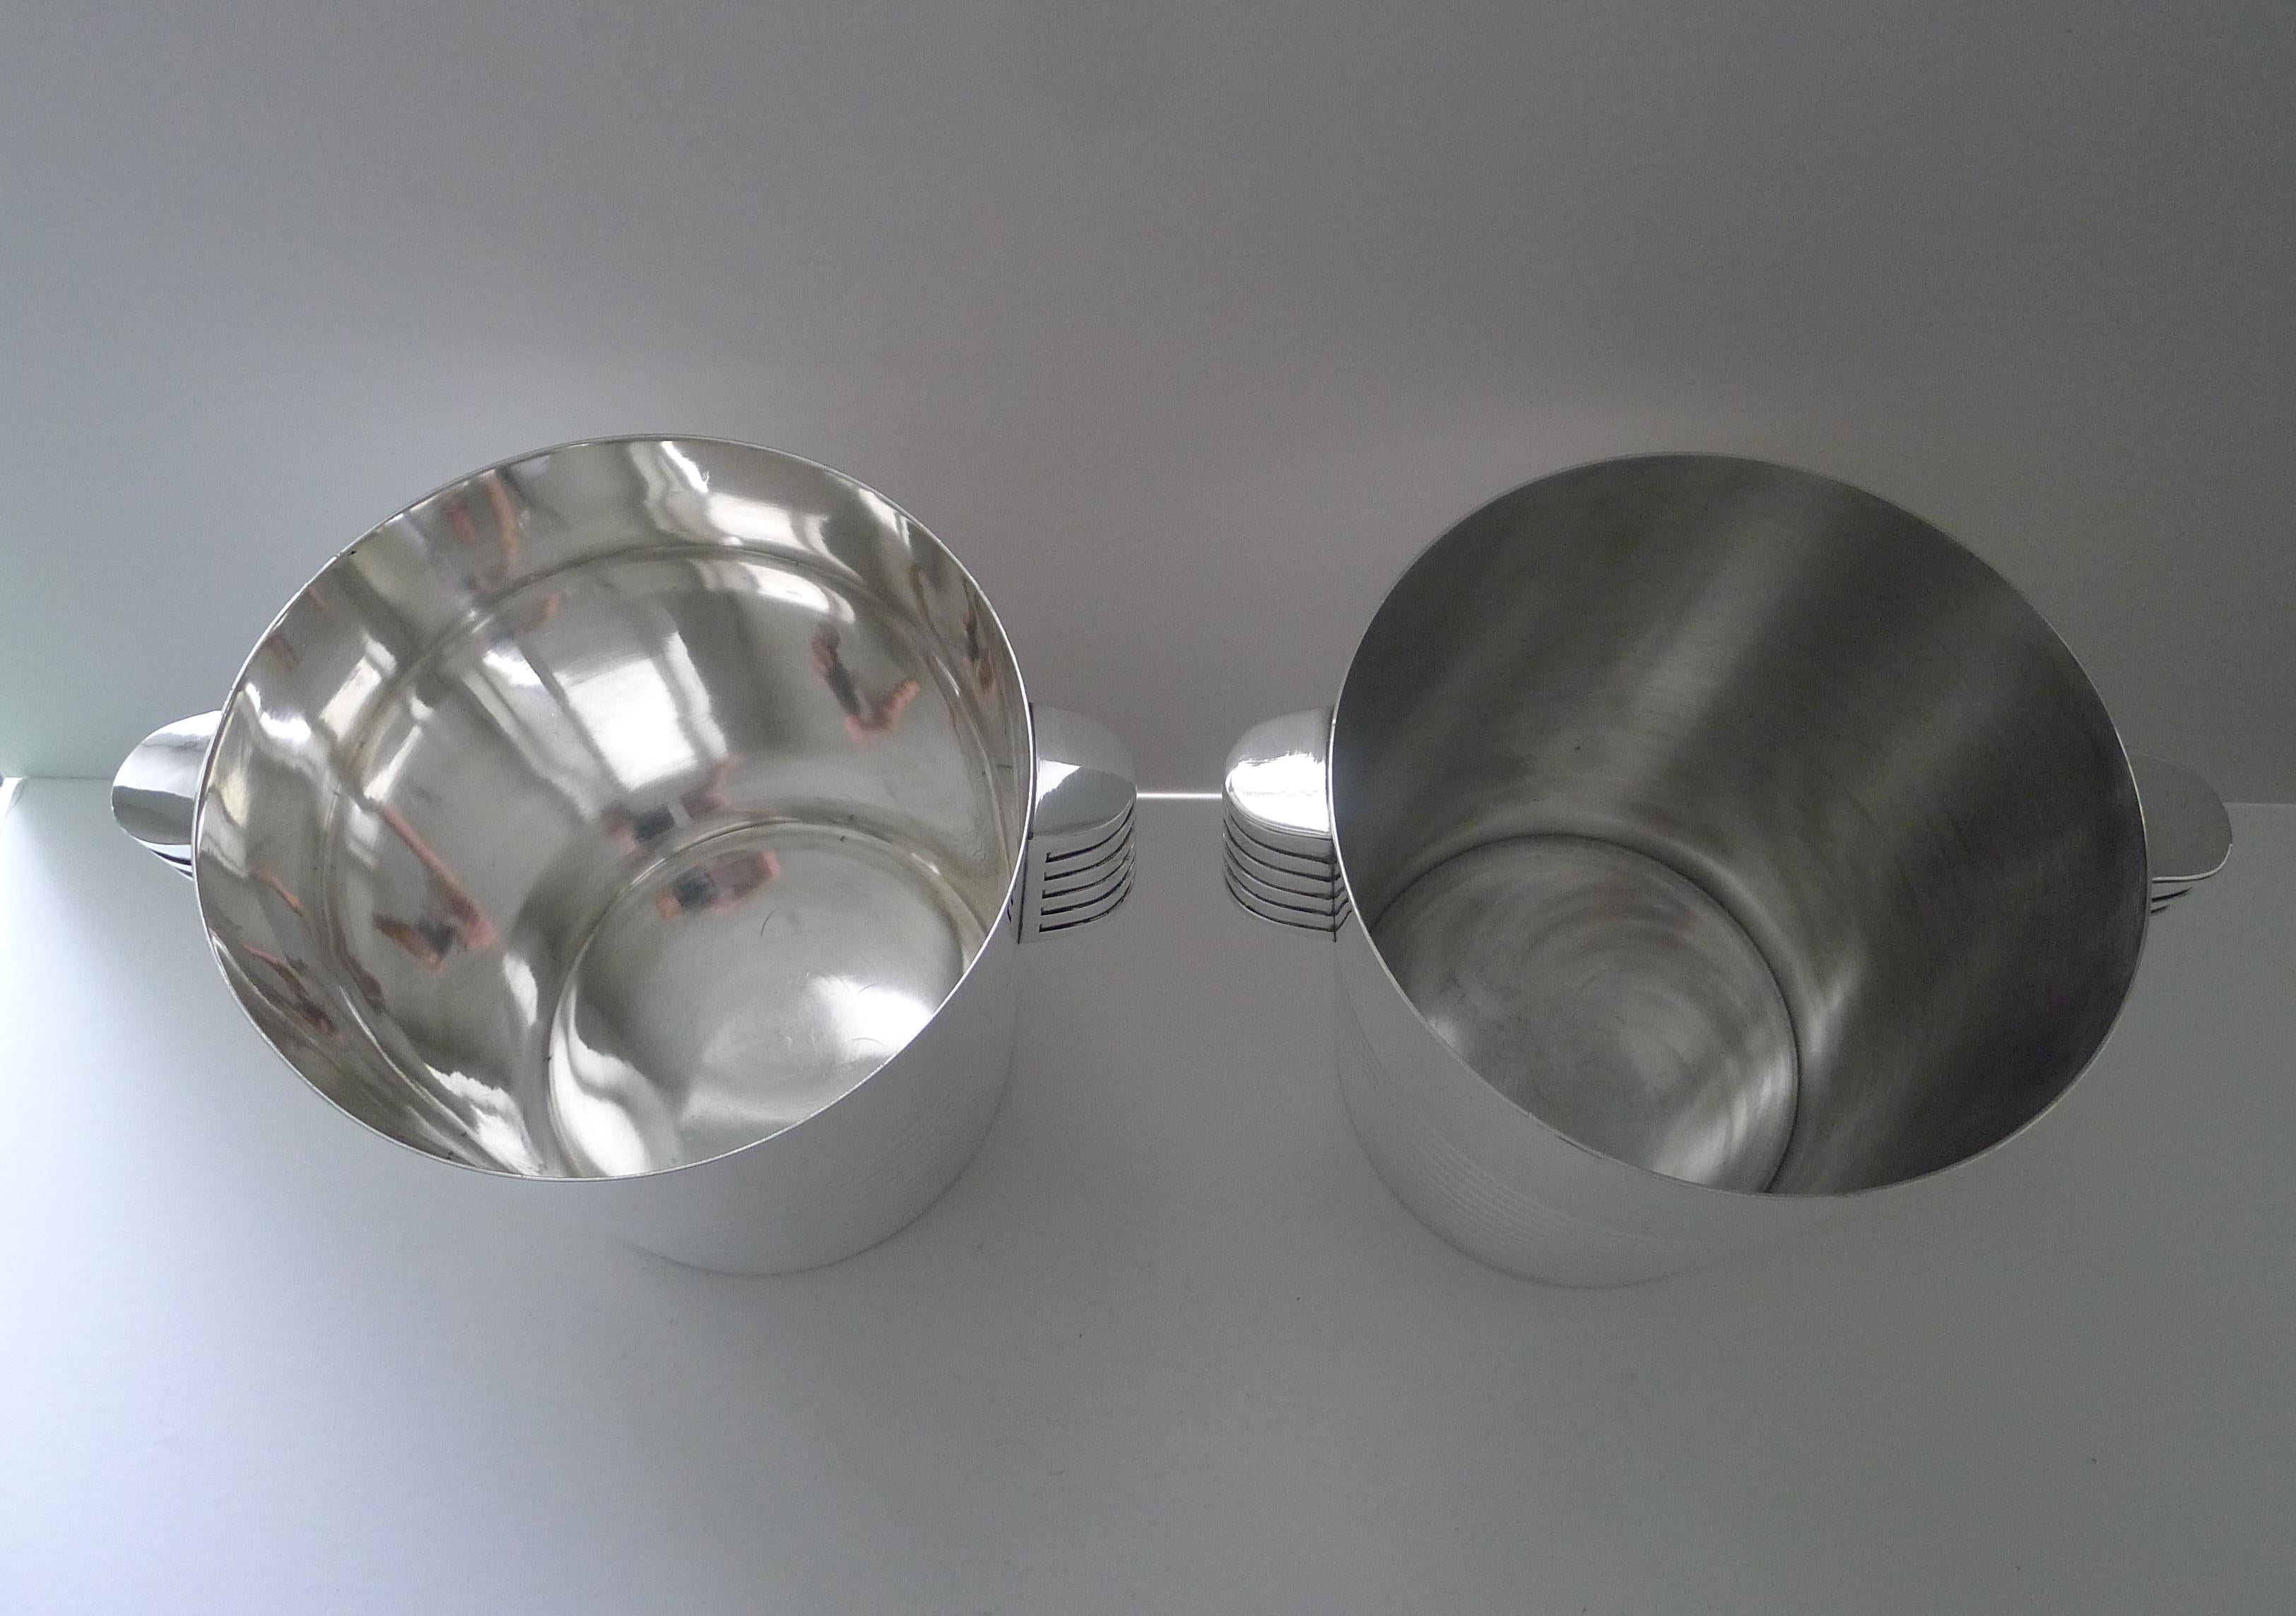 A rare opportunity to secure a pair of Art Deco silver plated Champagne buckets designed by the celebrated Luc Lanel for Christofle designed in1932.  A stylish ribbed vessel with with ribbed lug handles;

The pattern , called “Ondulations” was